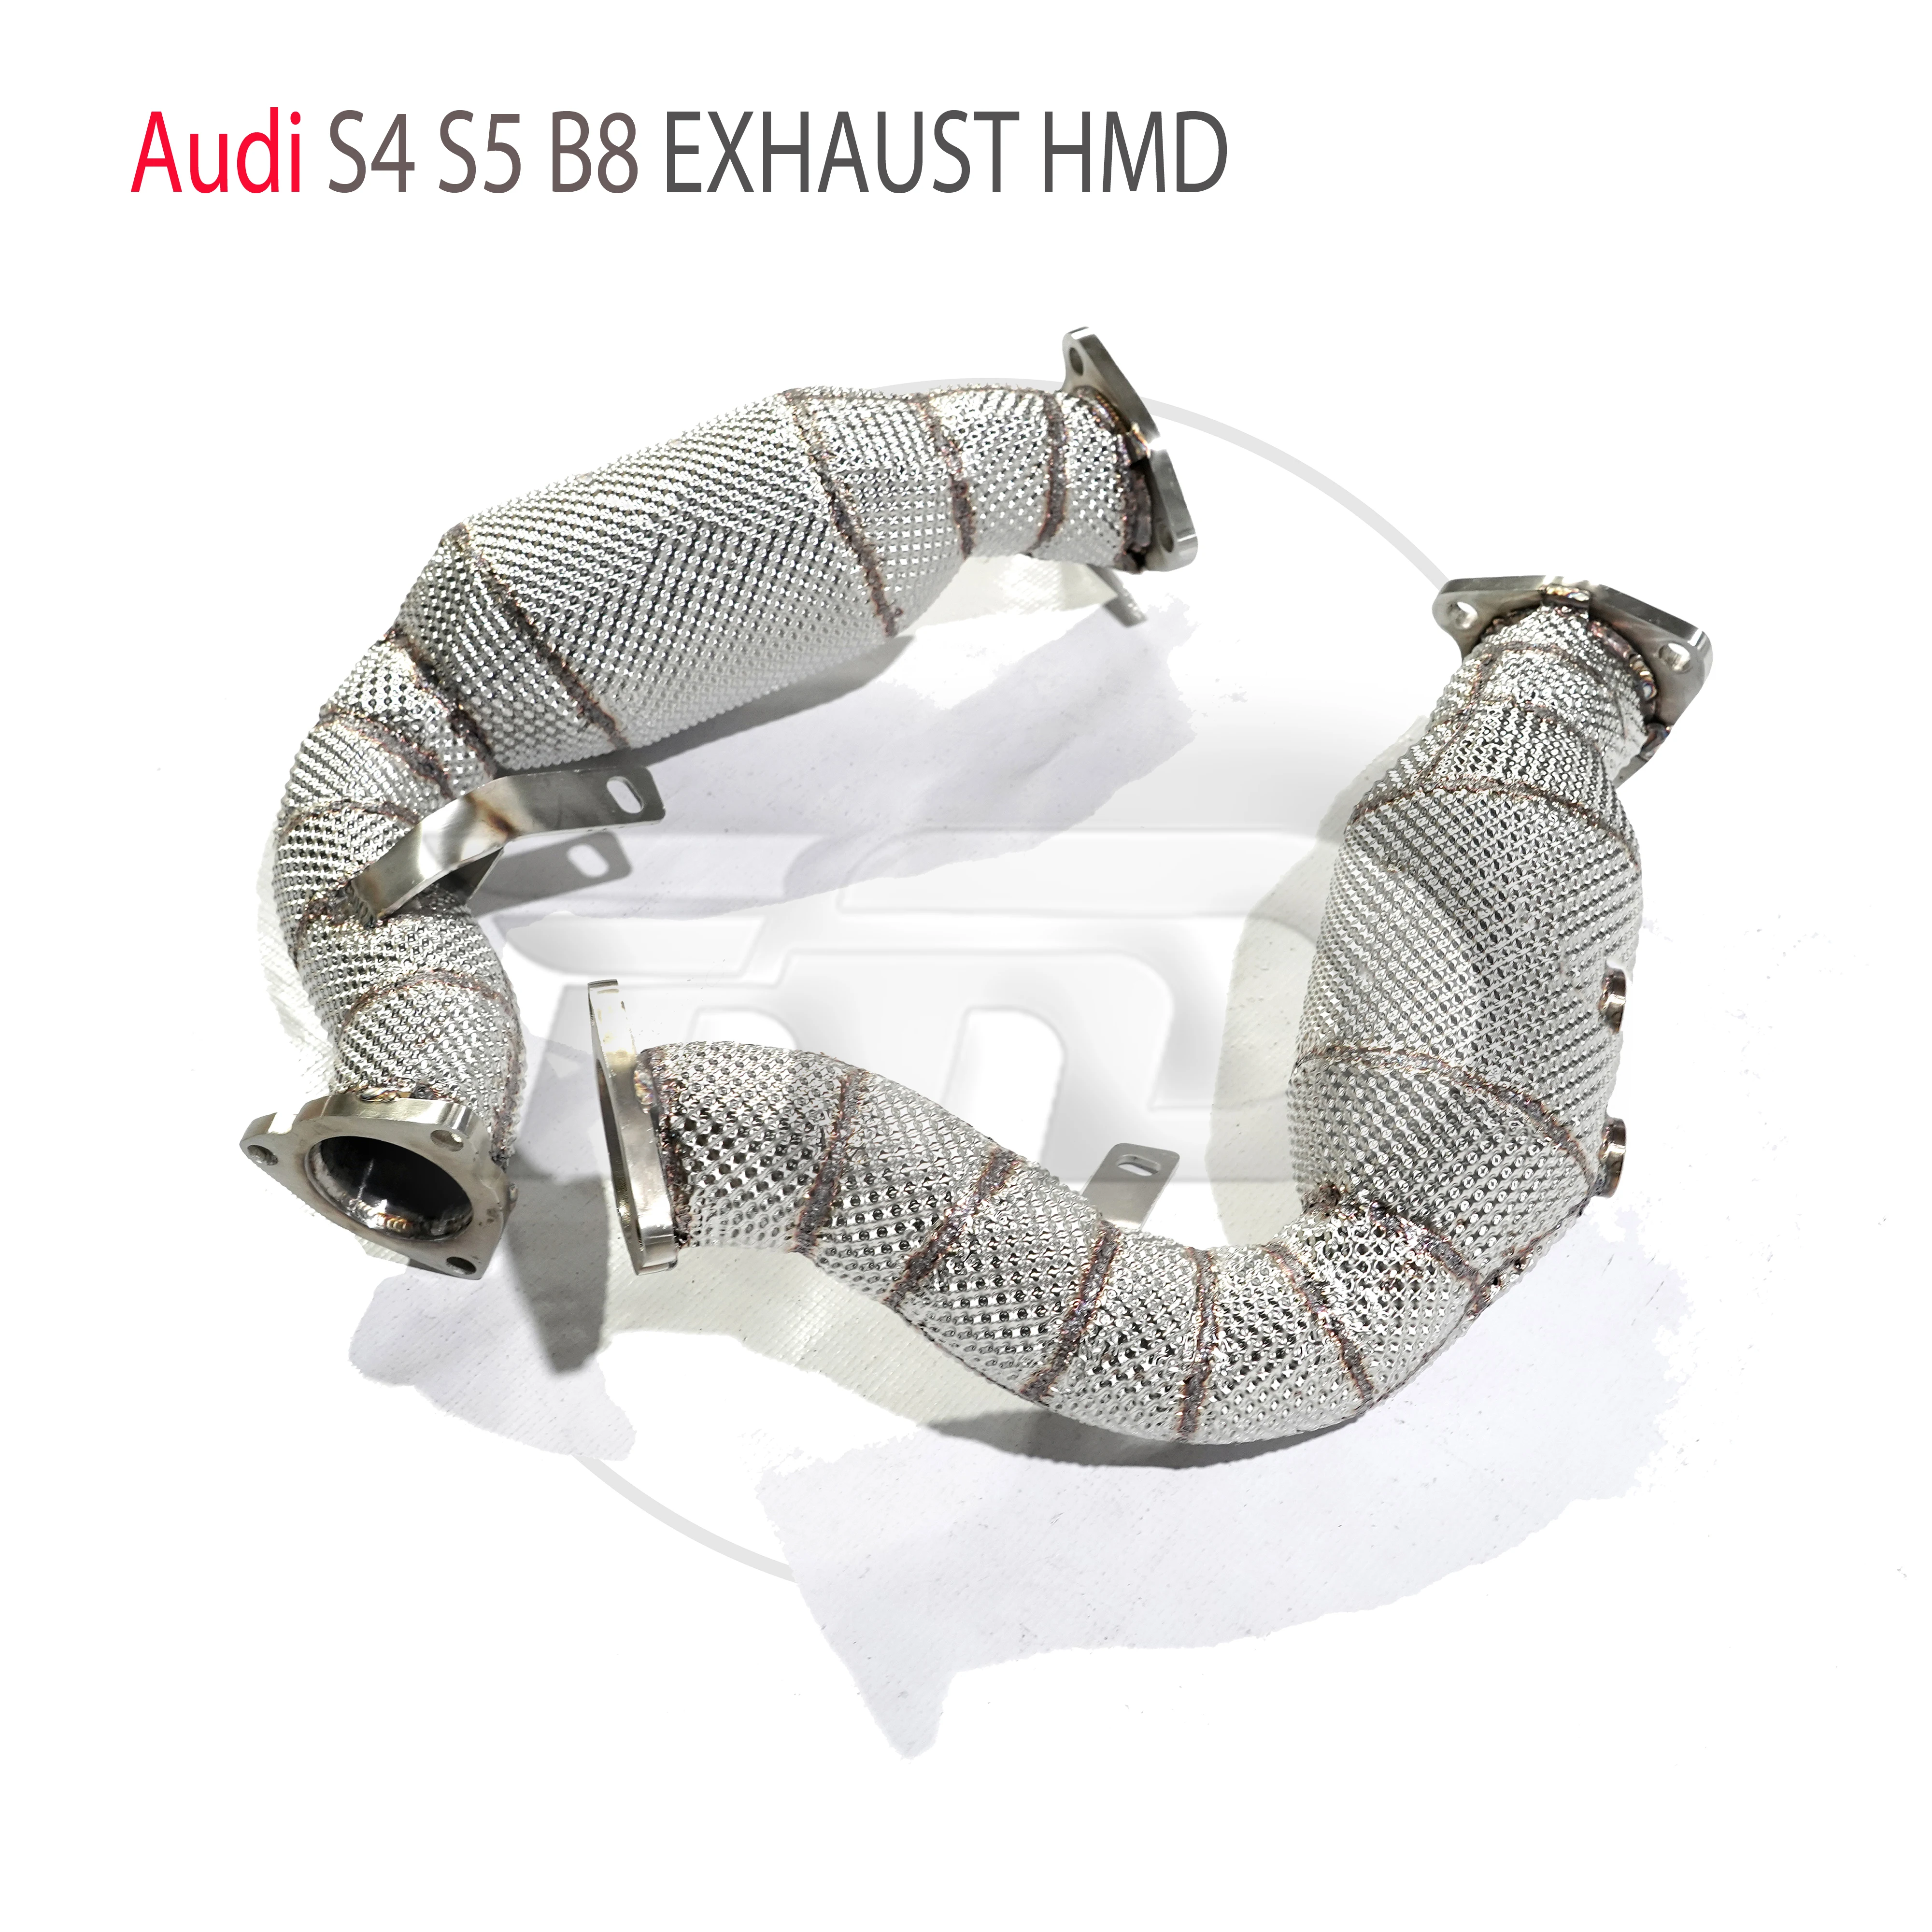 

HMD Exhaust Manifold High Flow Downpipe for Audi S4 S5 B8 Car Accessories With Catalytic Header Without Cat Catless Pipe